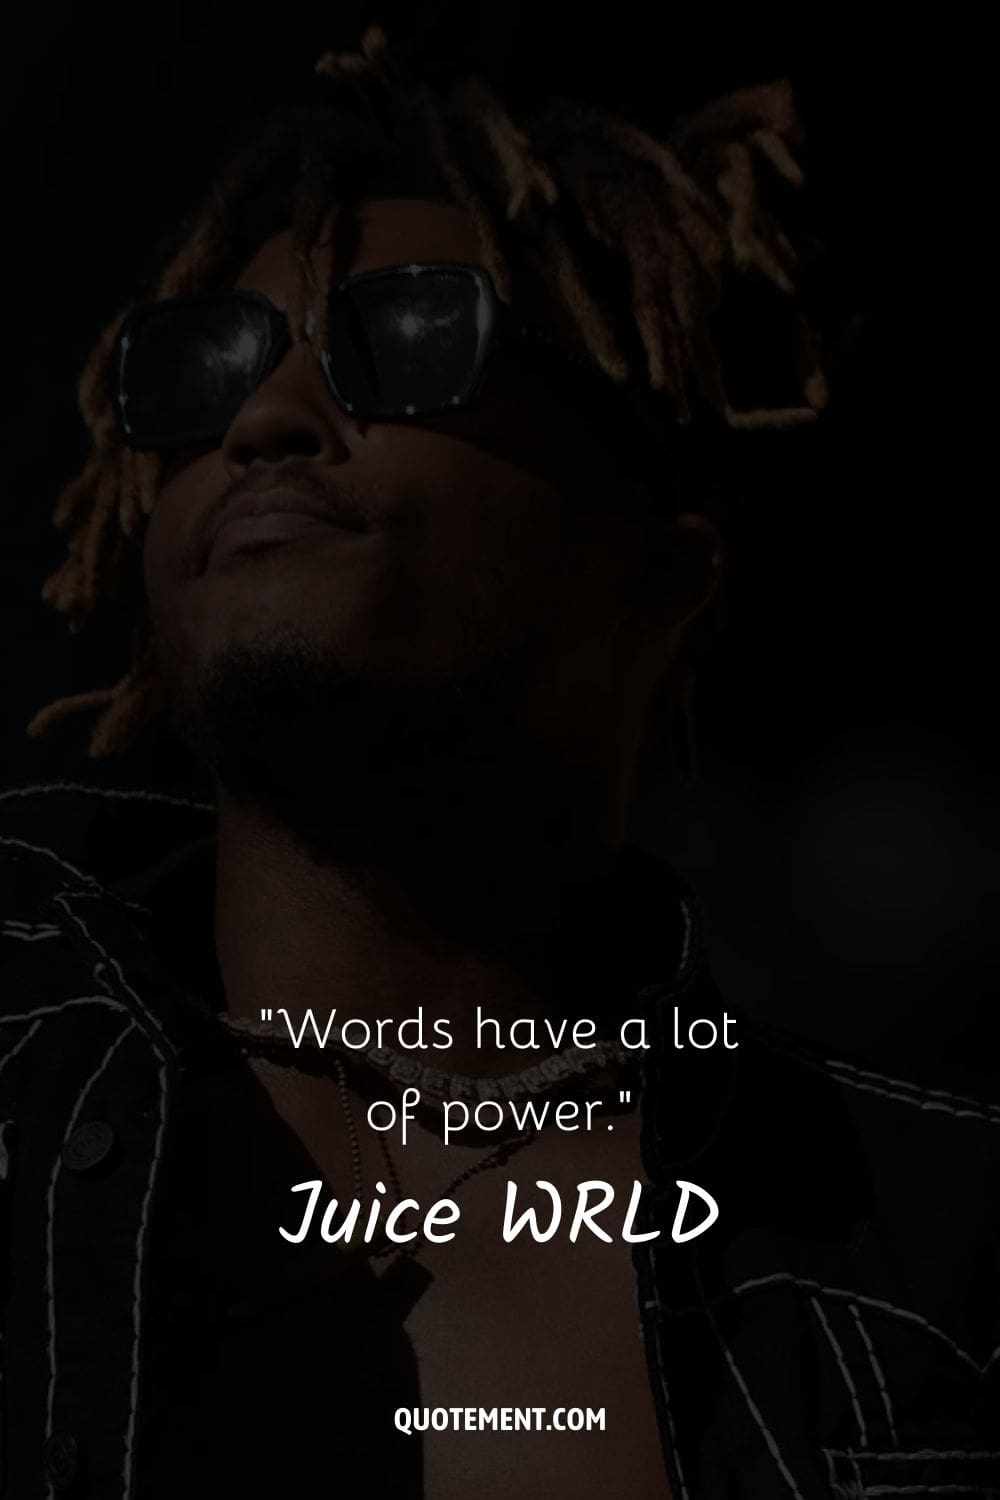 Words have a lot of power.